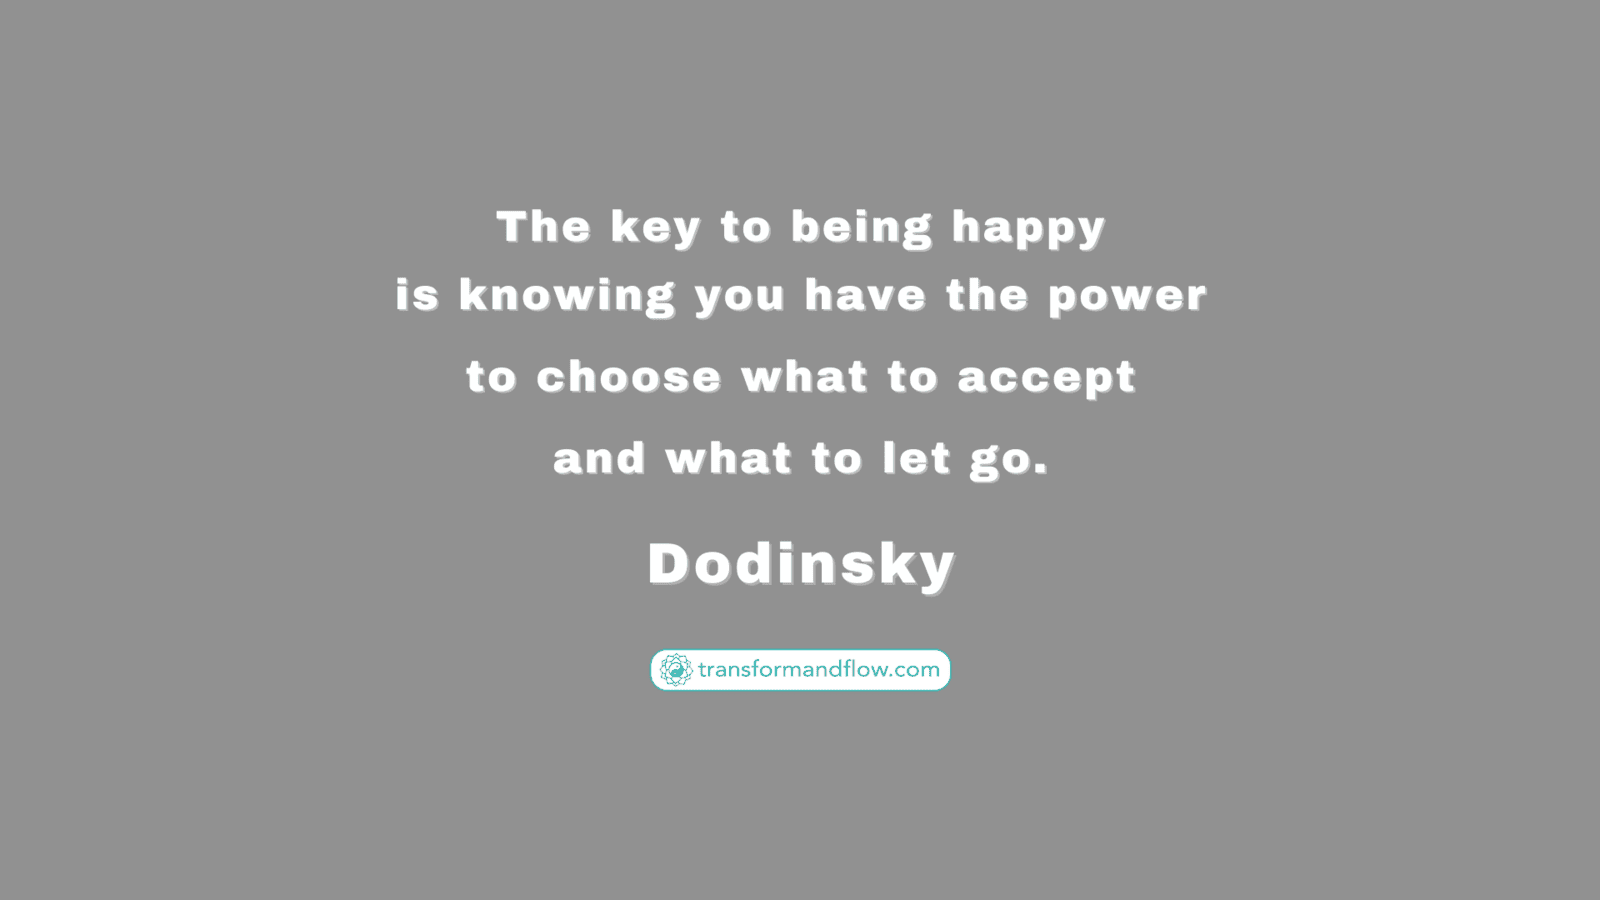 The key to being happy is knowing you have the power to choose what to accept and what to let go - Dudinsky